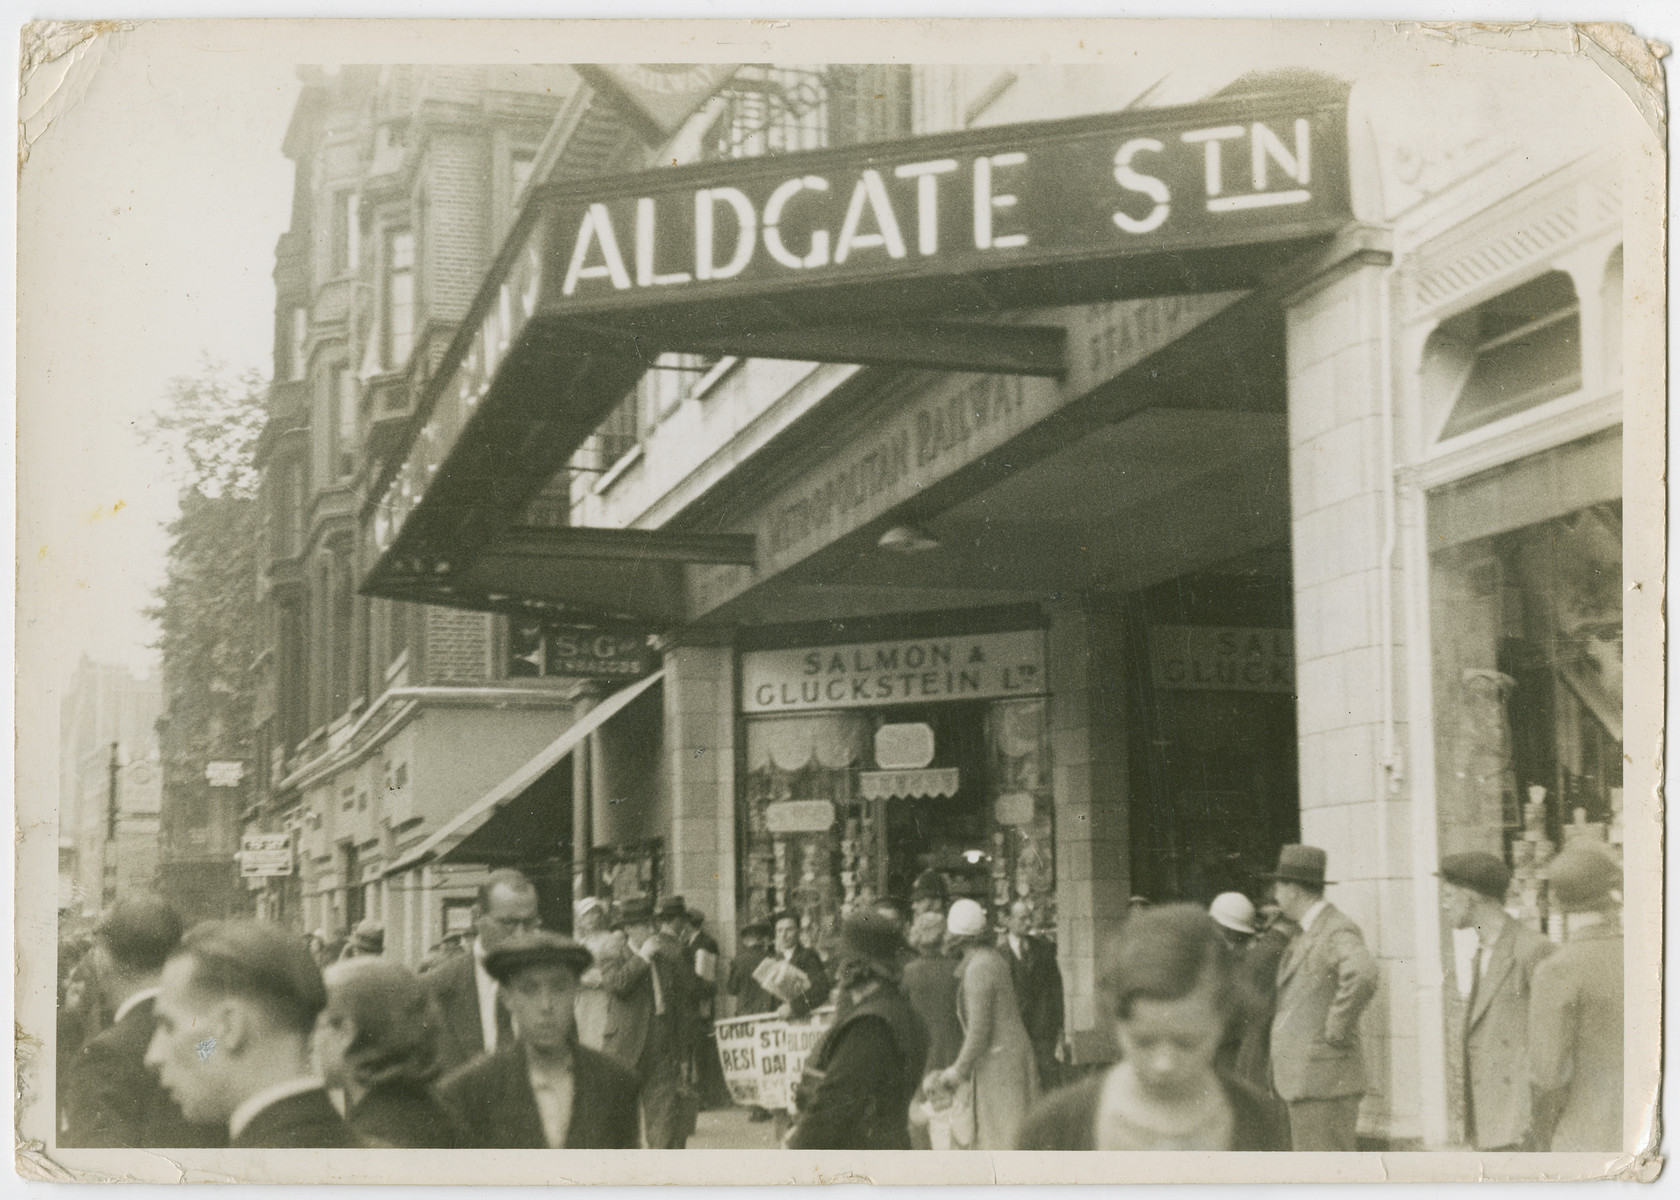 View of a busy commercial street in the East End of London.

[Photograph is used on page 13 of Robert Gessner's "Some of My Best Friends are Jews."]